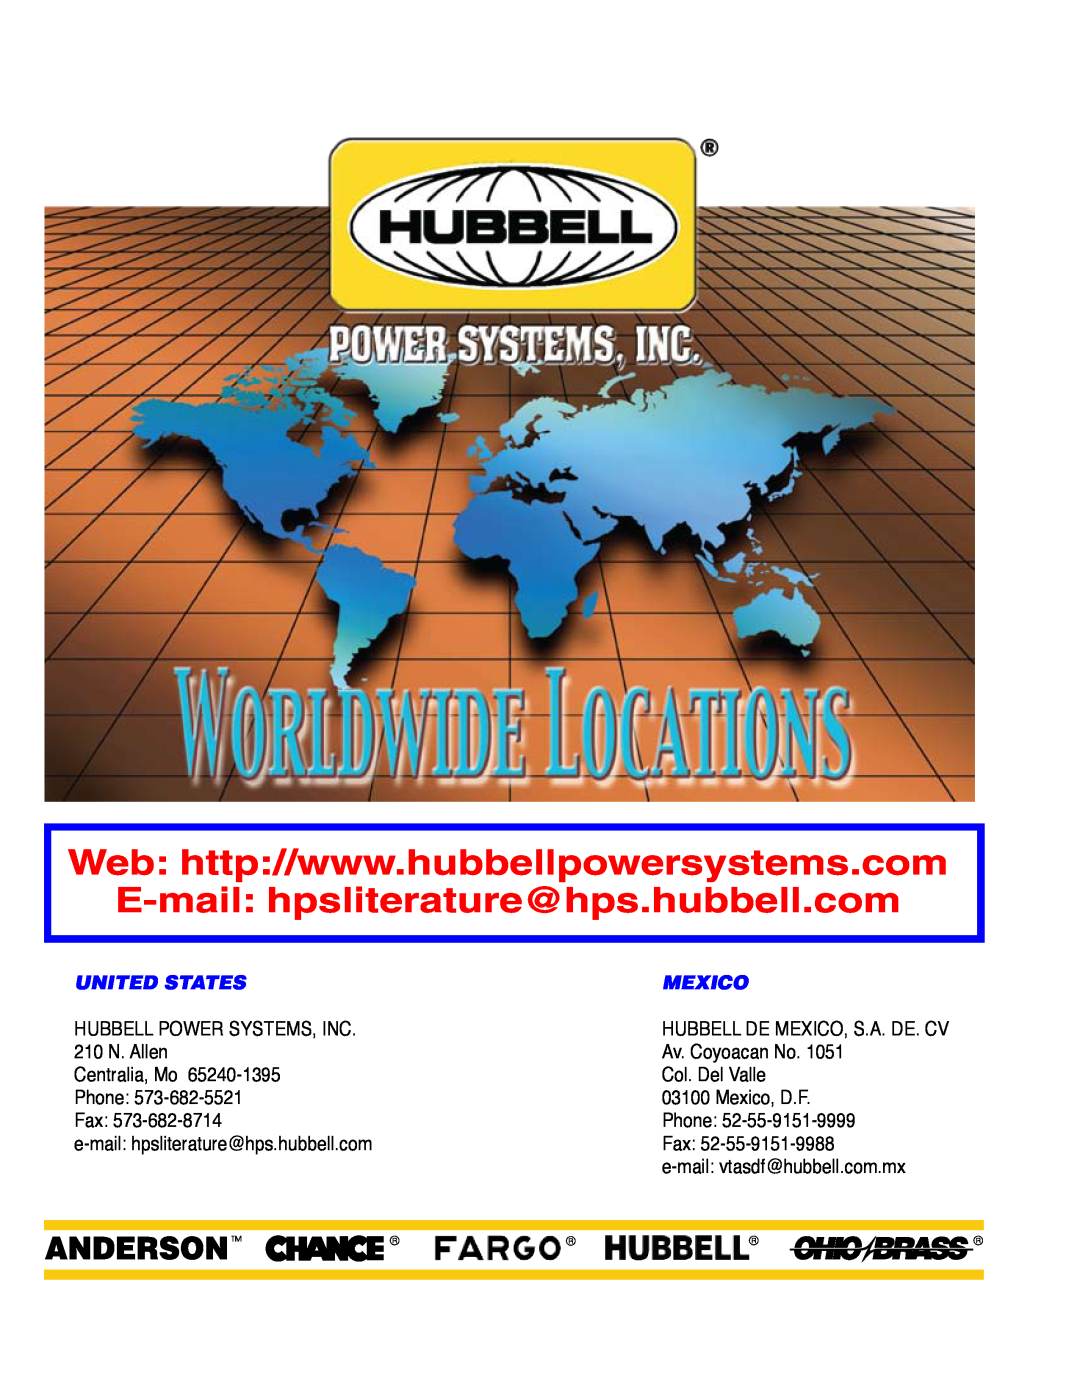 Hubbell Type D6, Type D7, Type AR warranty 14A-20, E-mail hpsliterature@hps.hubbell.com, United States, Mexico 